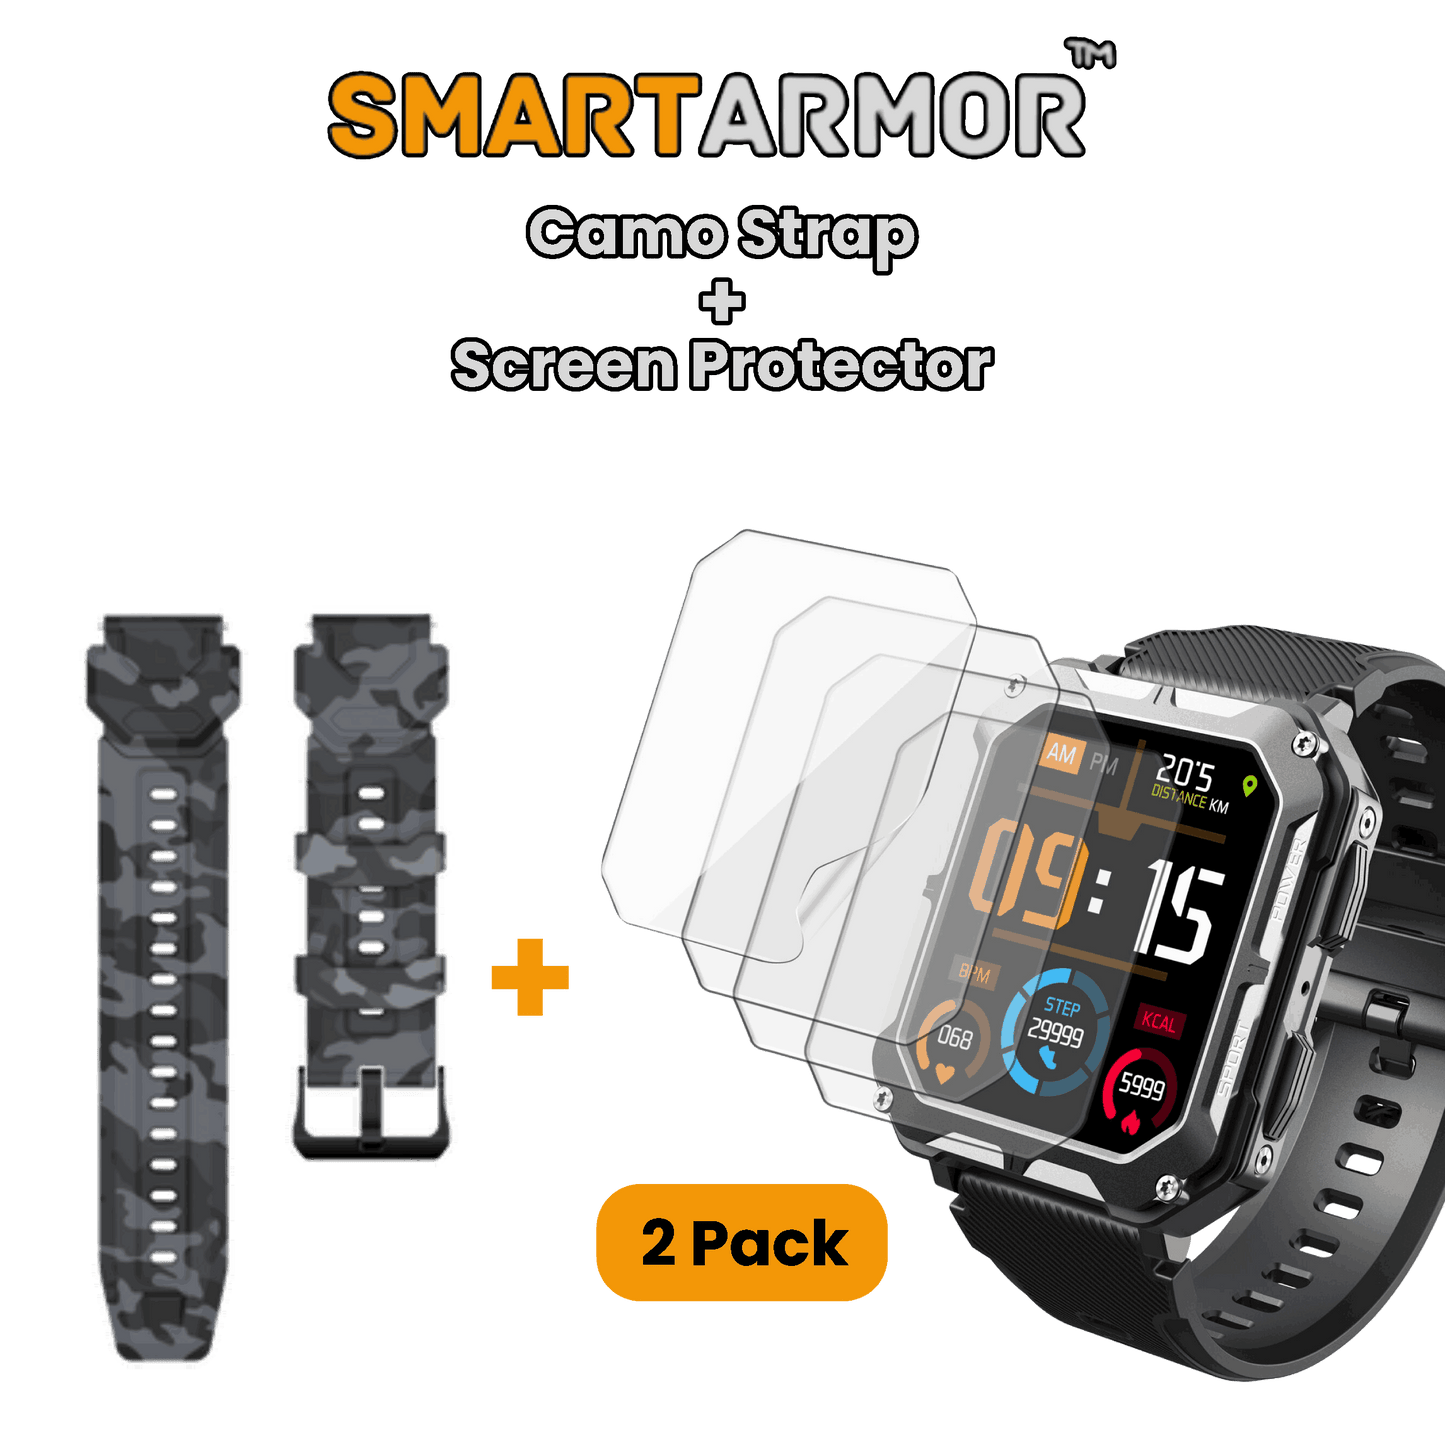 Strap + Screen Protector [Save $20]